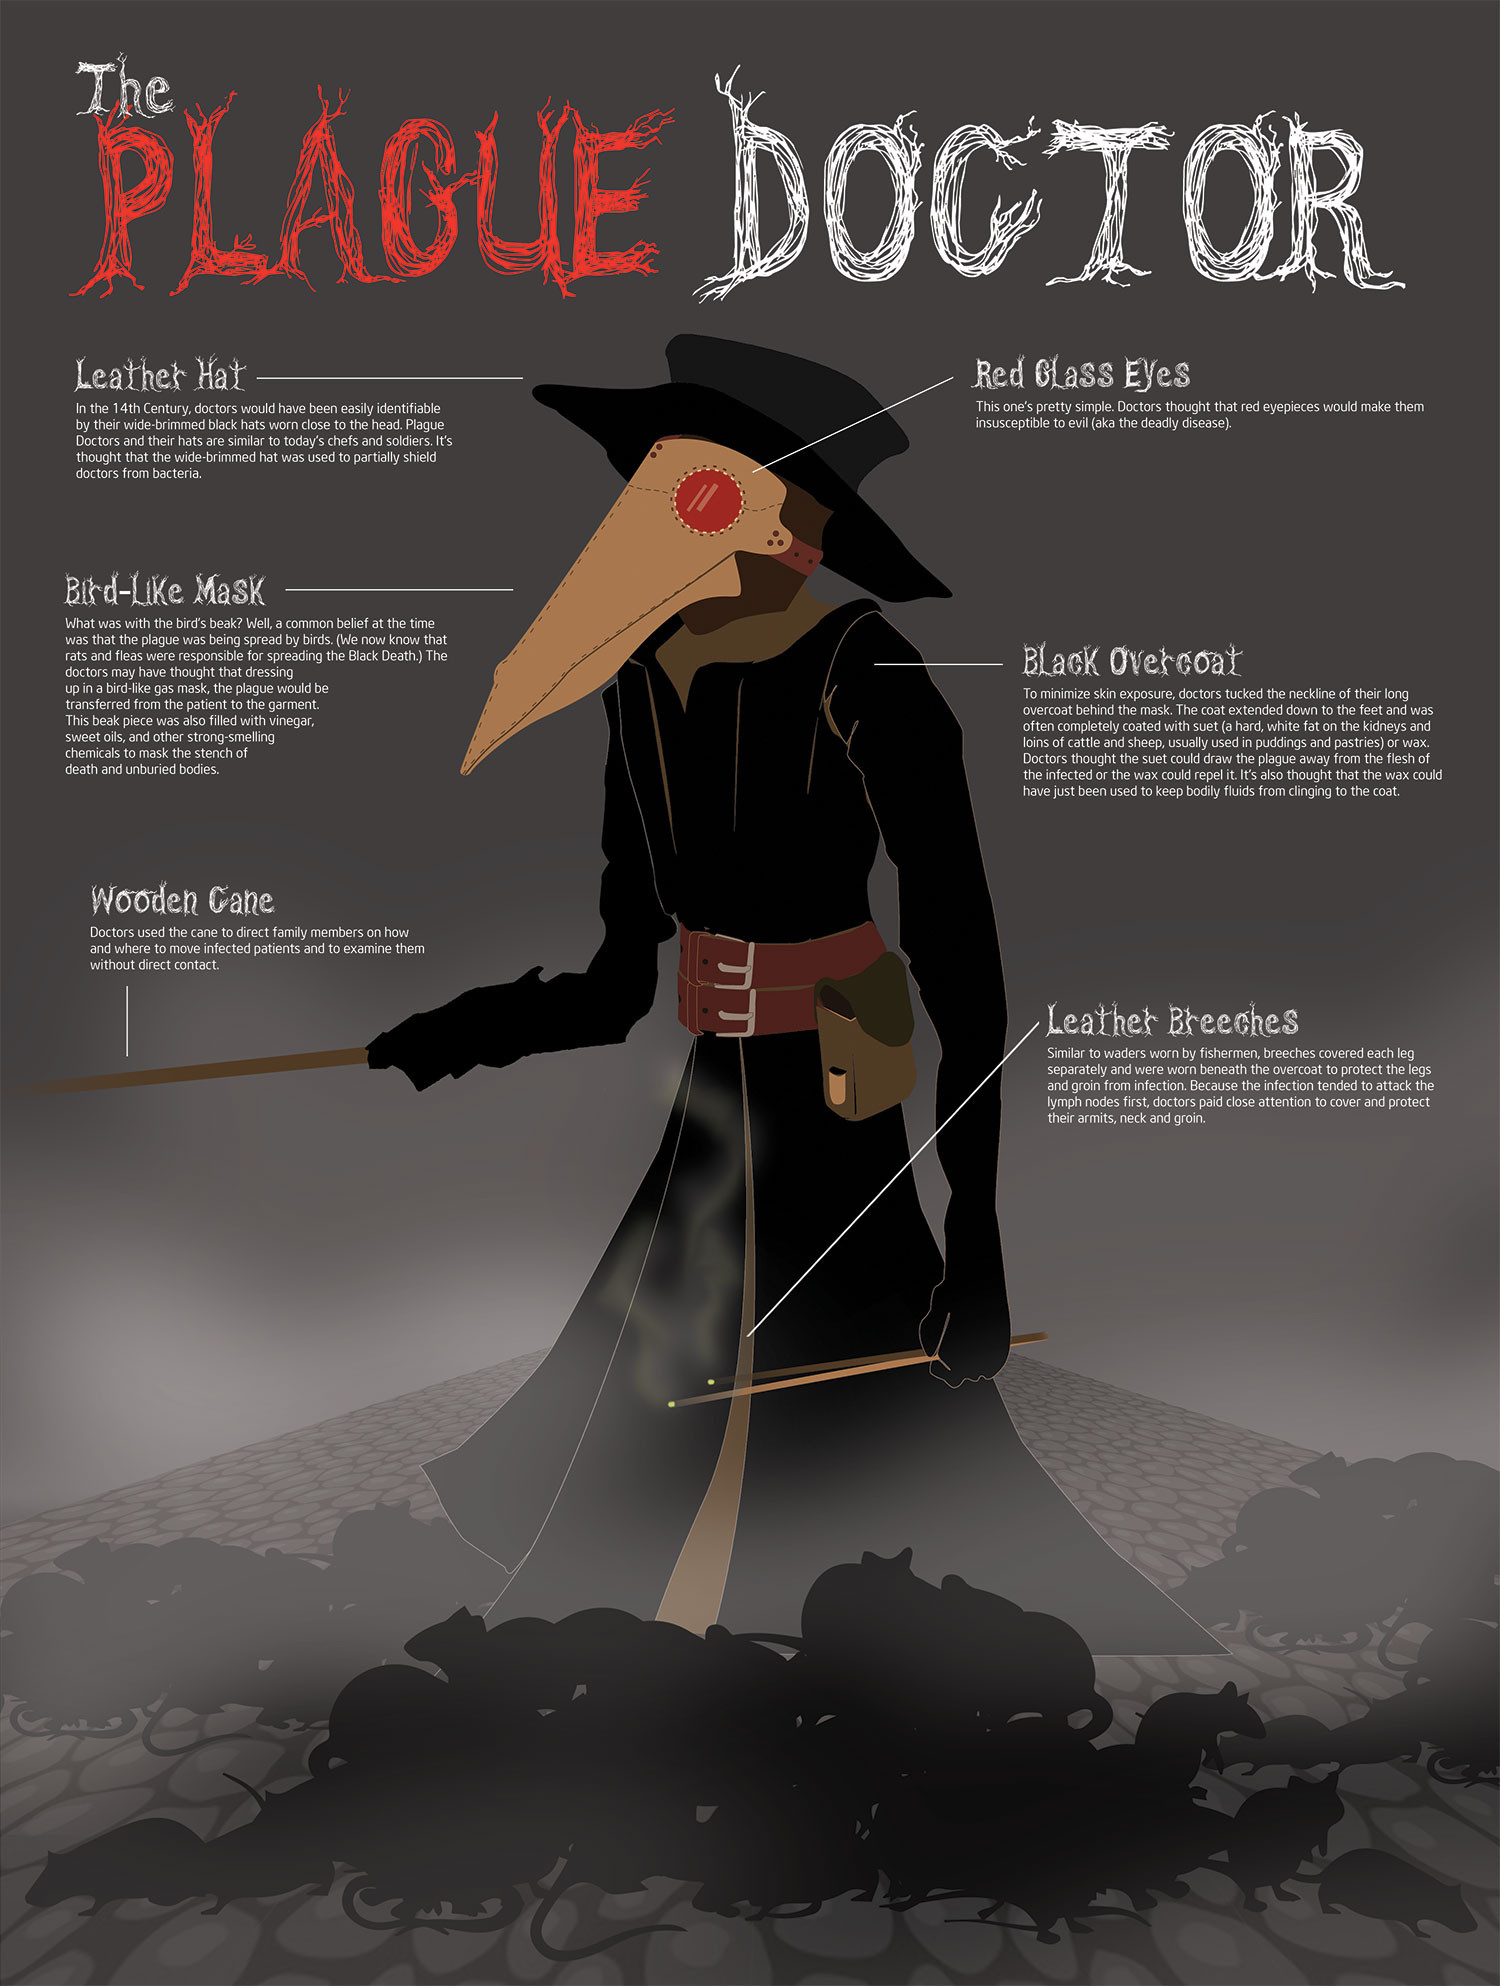 What Is A Plague Doctor